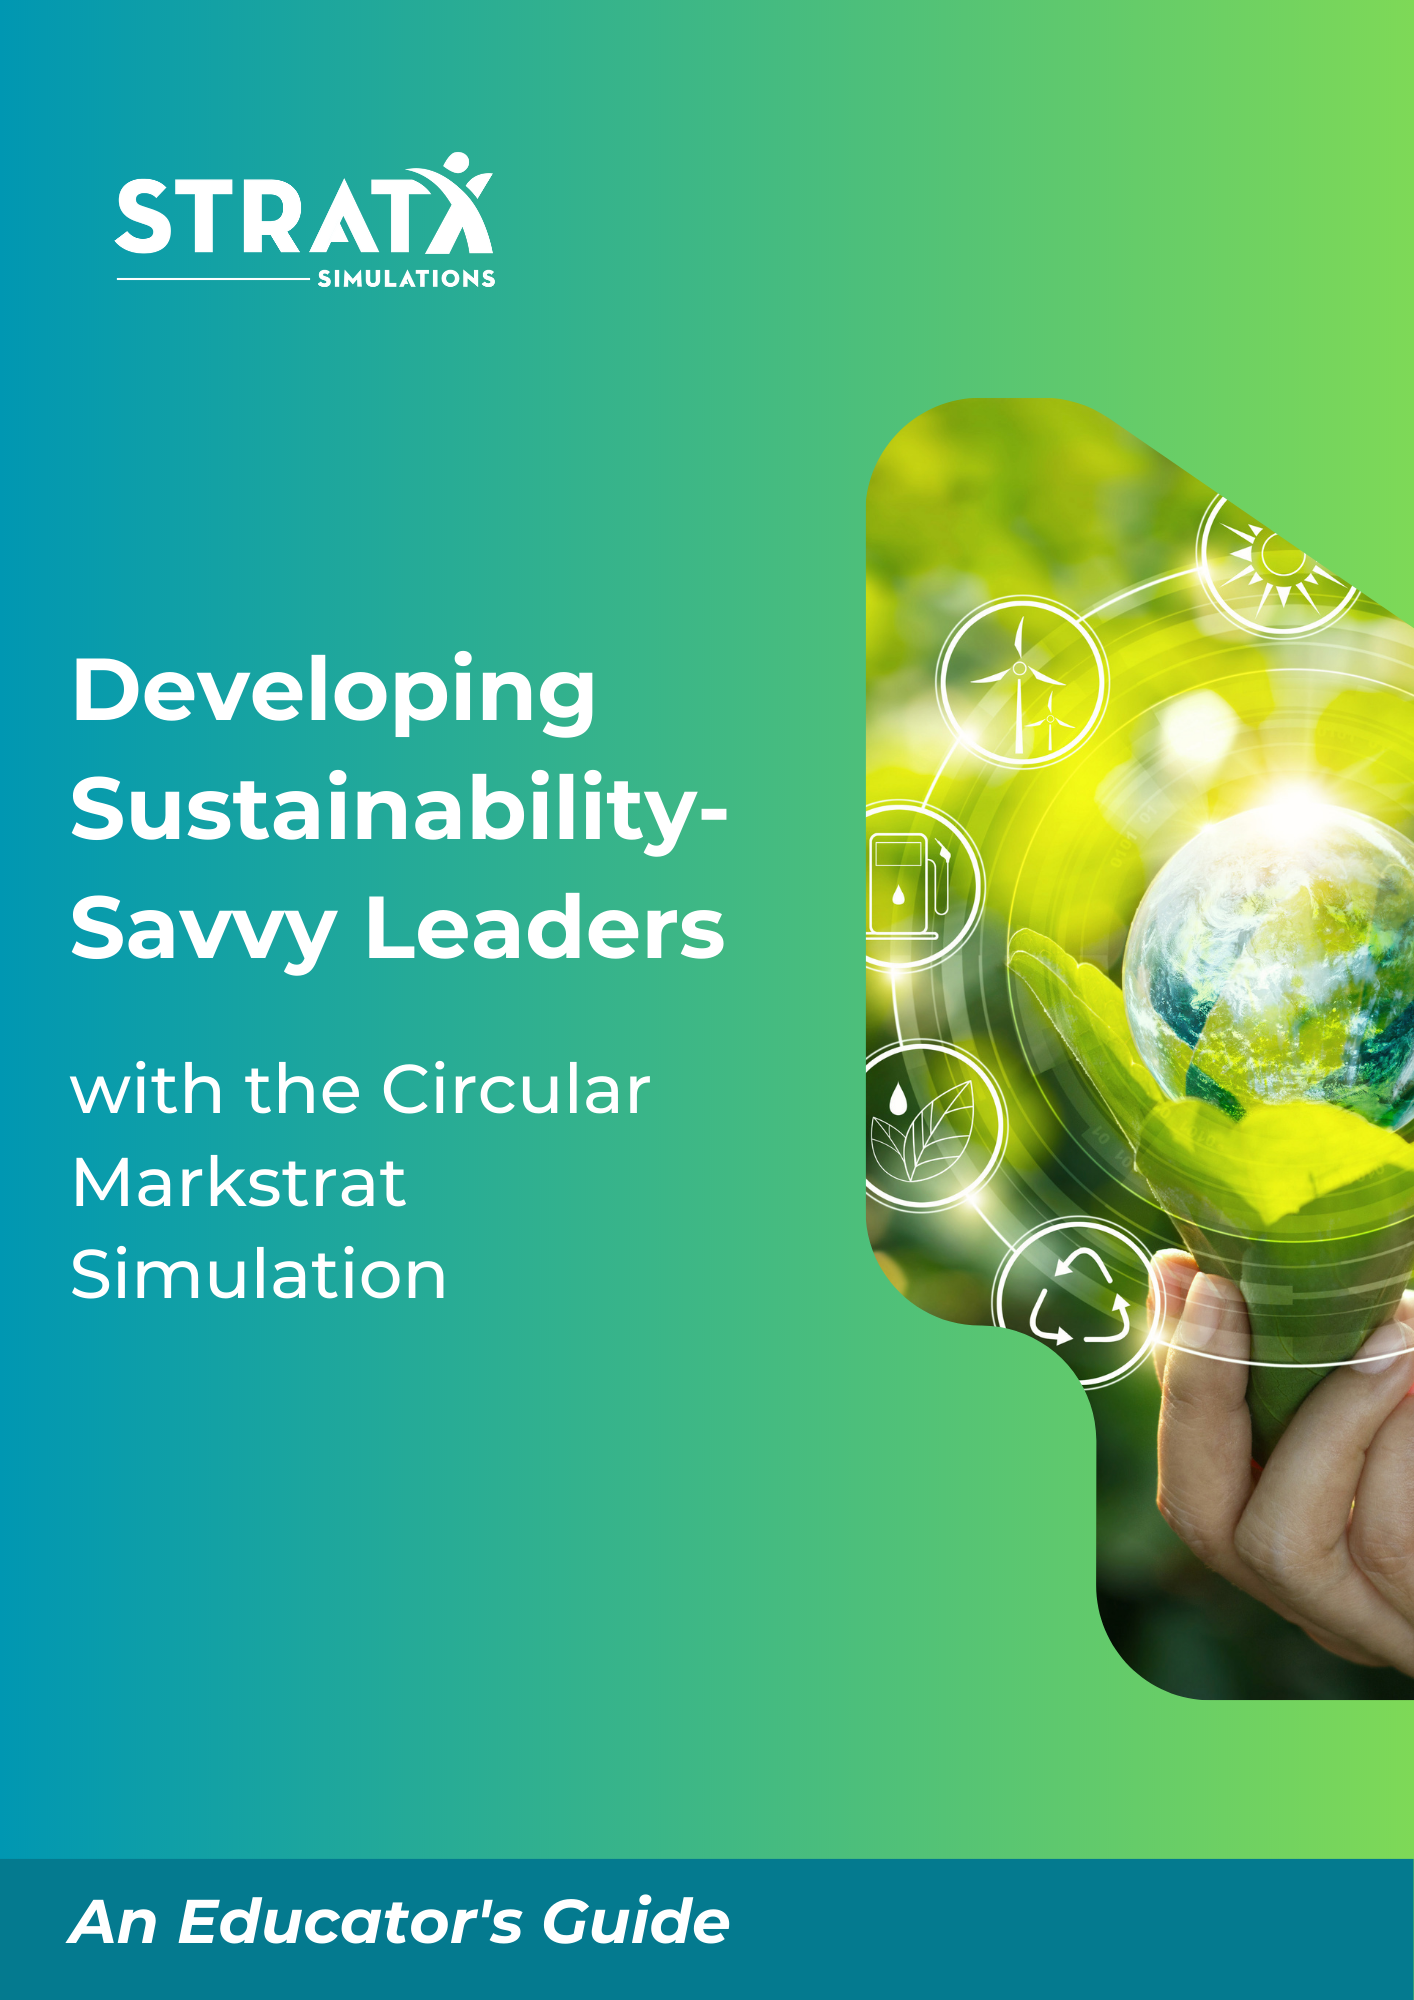 Developing Sustainability-Savvy Leaders